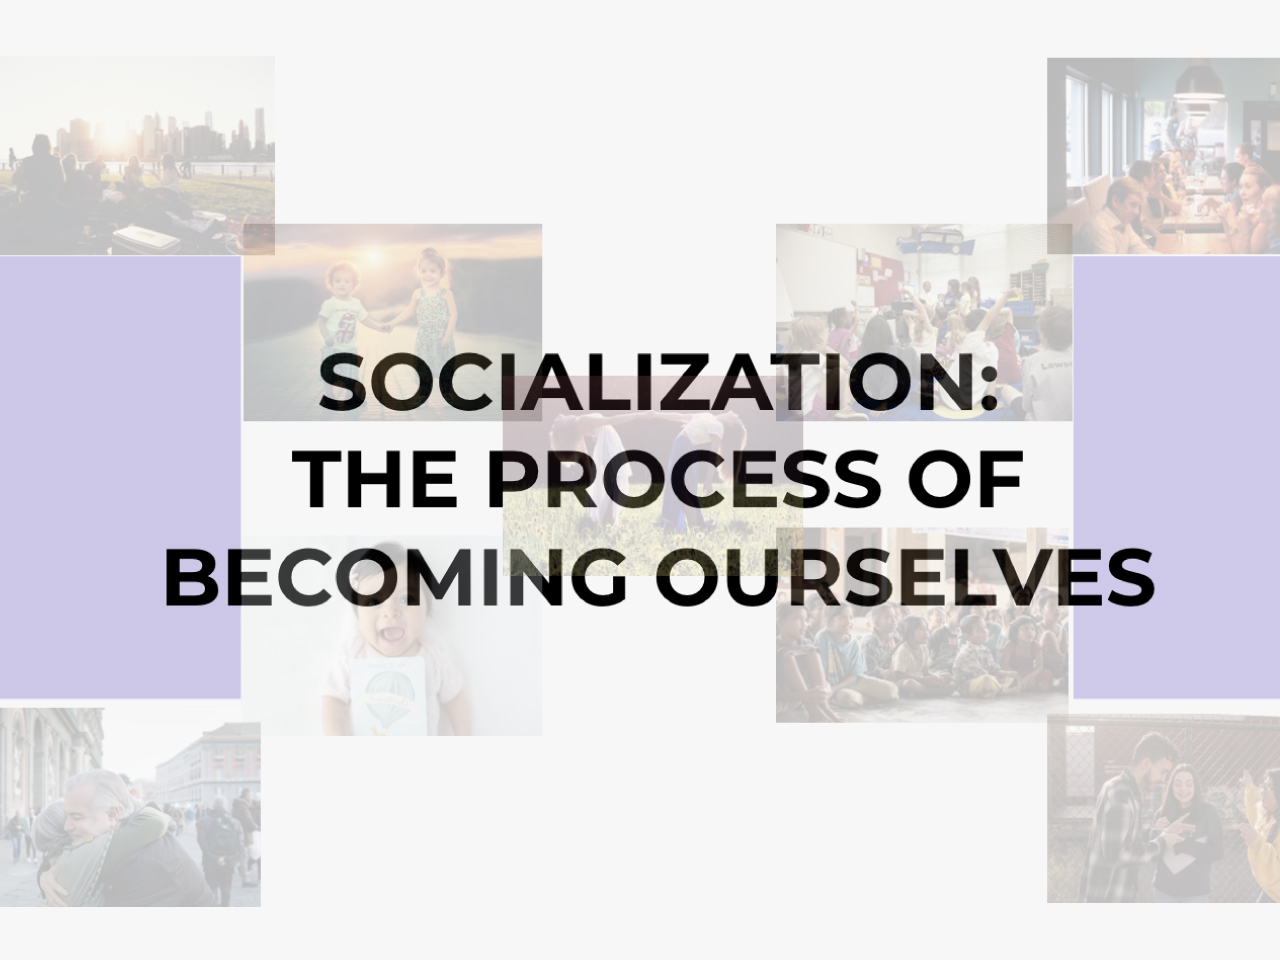 Socialization: The Process of Becoming Ourselves